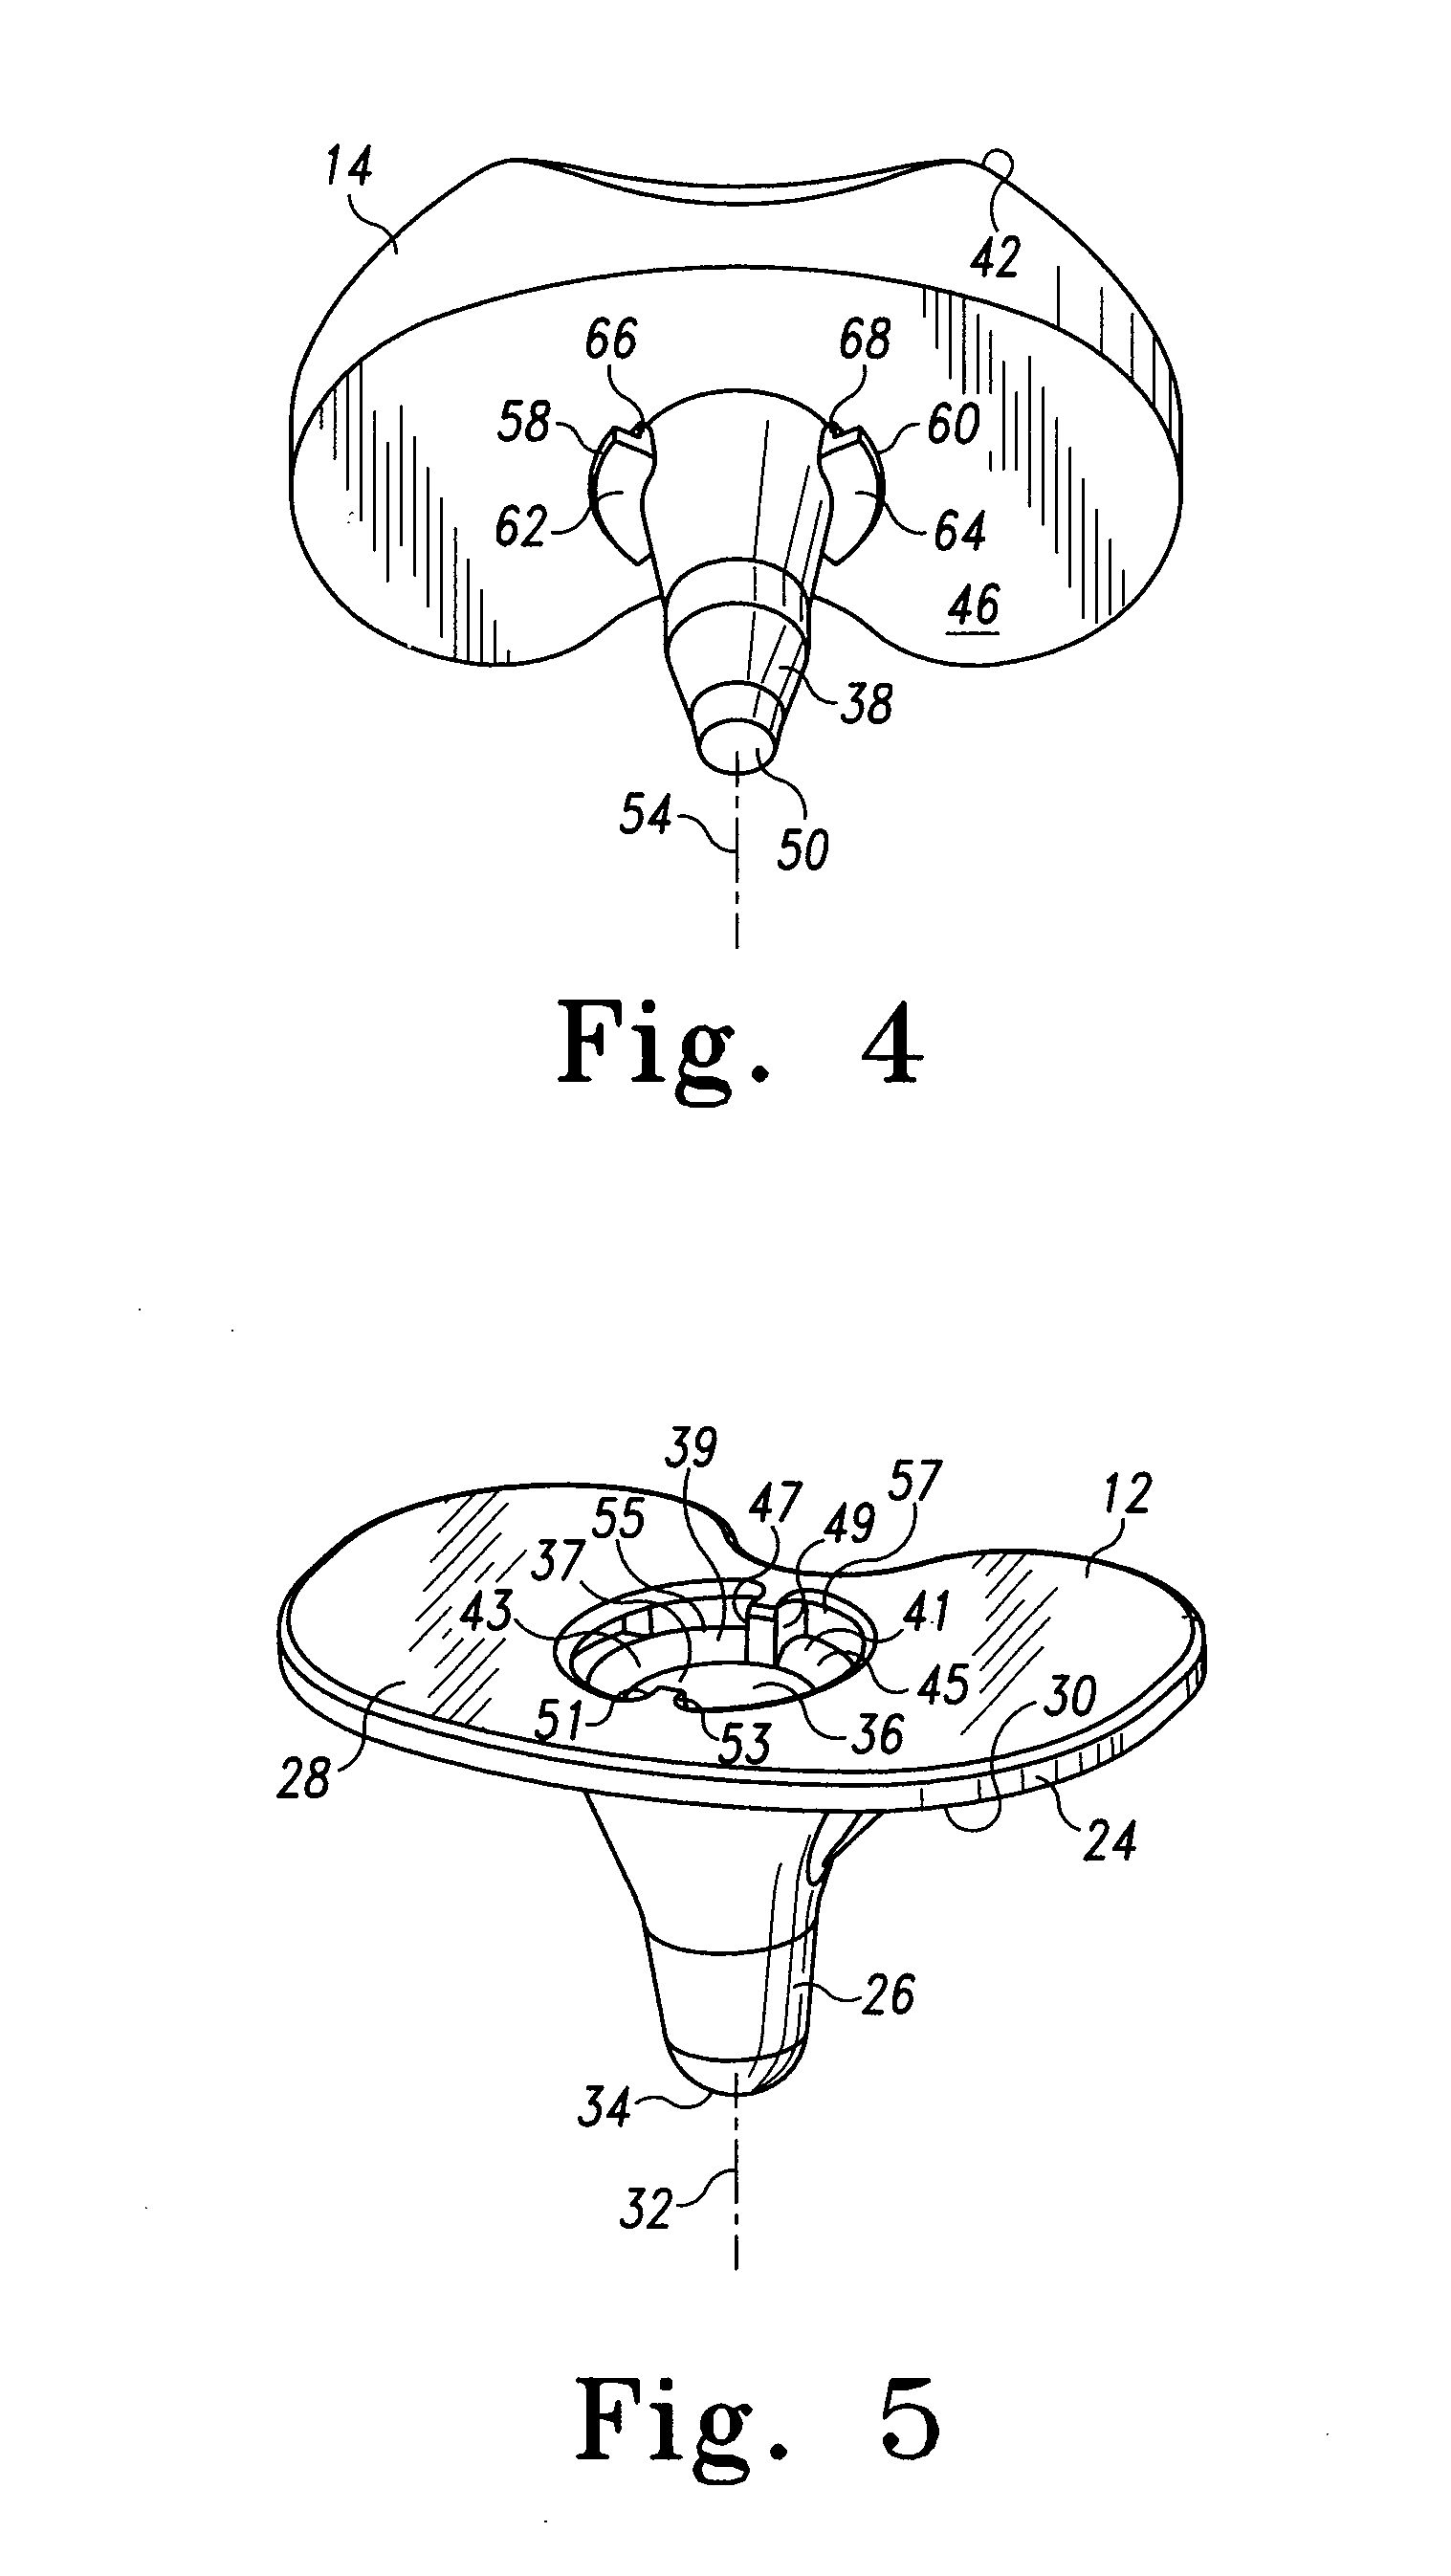 Modular fixed and mobile bearing prosthesis system